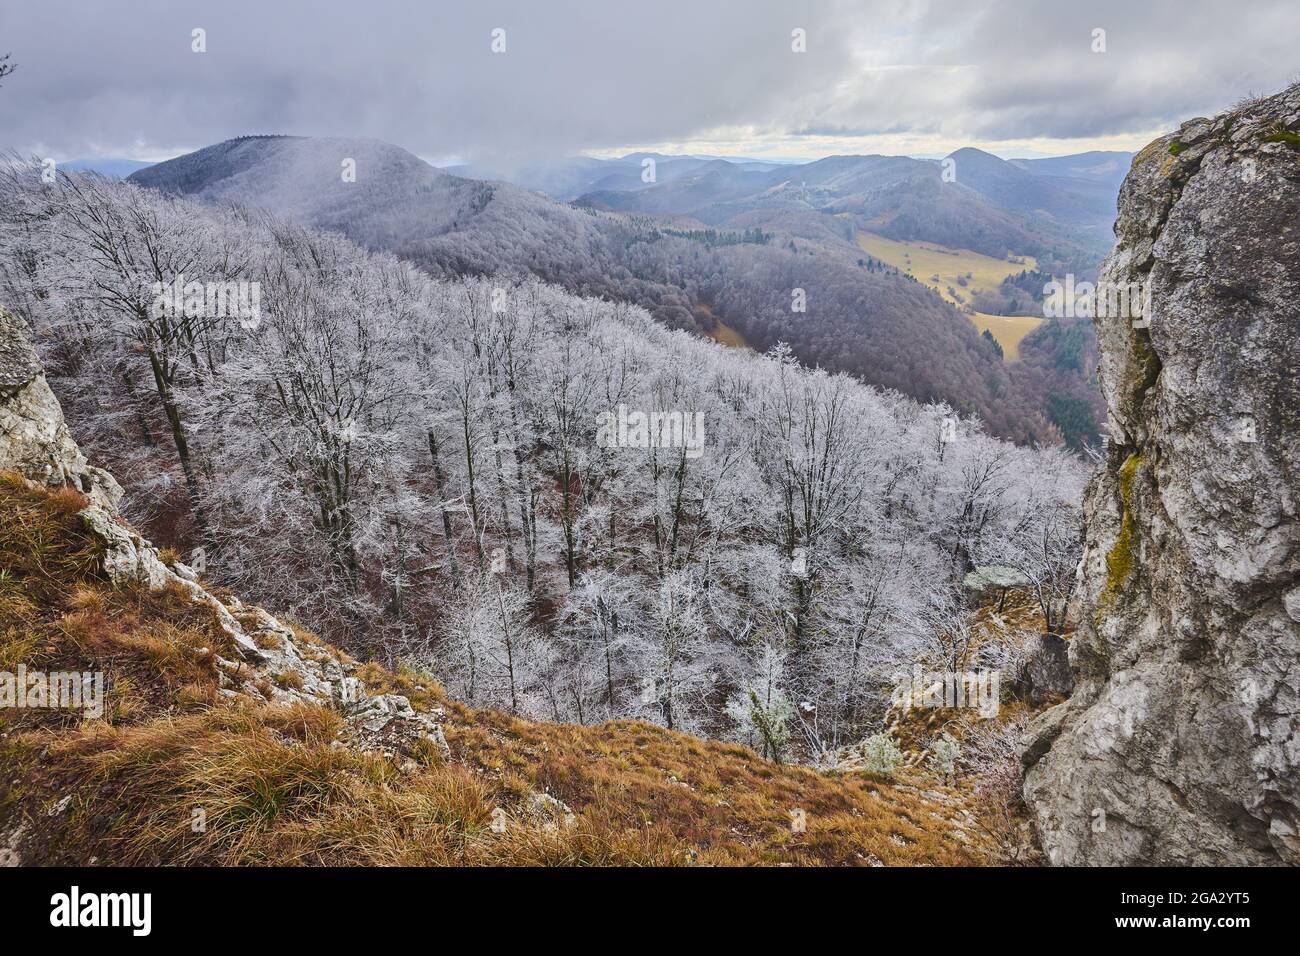 Snowy European beech (Fagus sylvatica) trees on the mountaintop at Mount Vapec in the Strazov Mountains overlooking the countryside Stock Photo